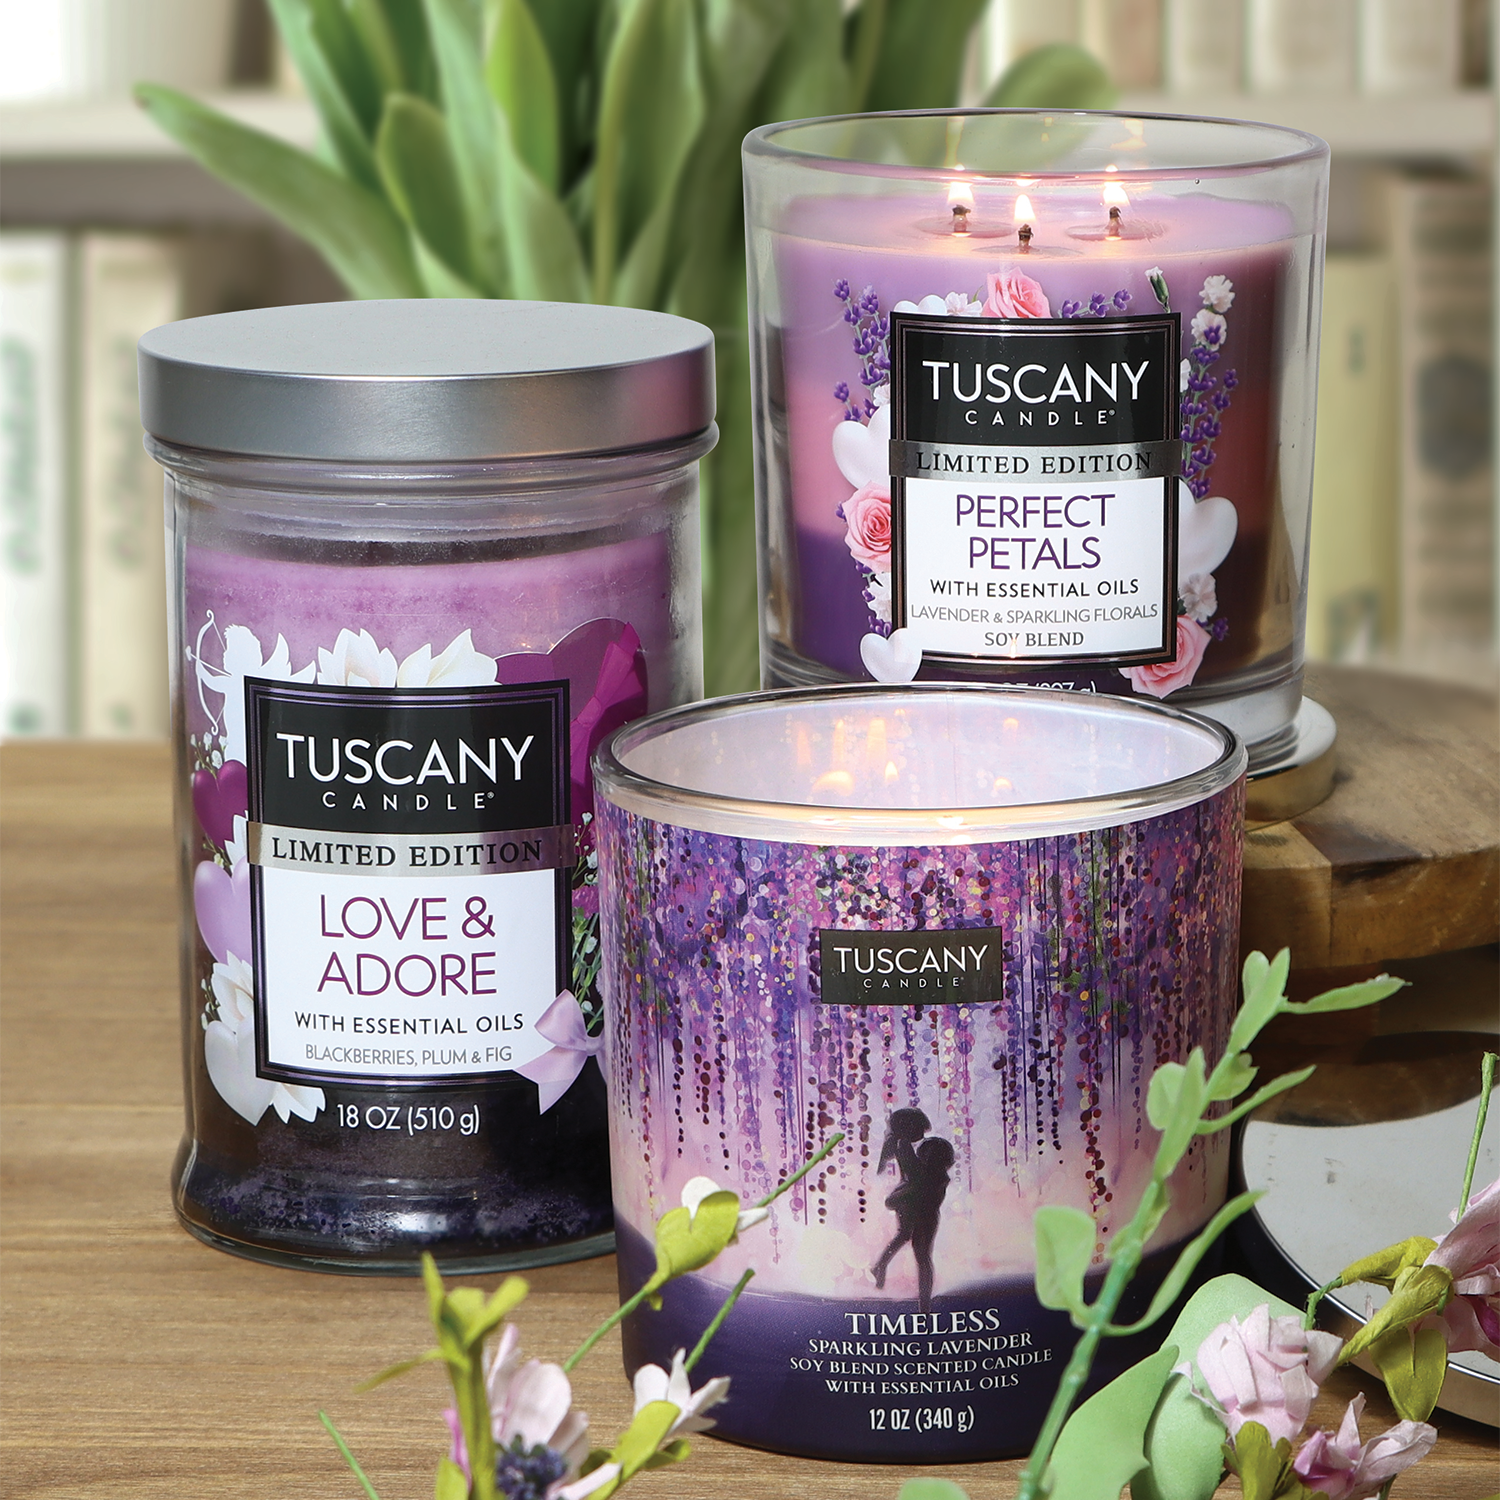 Explore the essence of Tuscany with our Perfect Petals Long-Lasting Scented Jar Candle (14 oz) by Tuscany Candle® SEASONAL that captures the enchanting beauty and timeless romance of this picturesque region. Immerse yourself in the warm glow and captivating frag